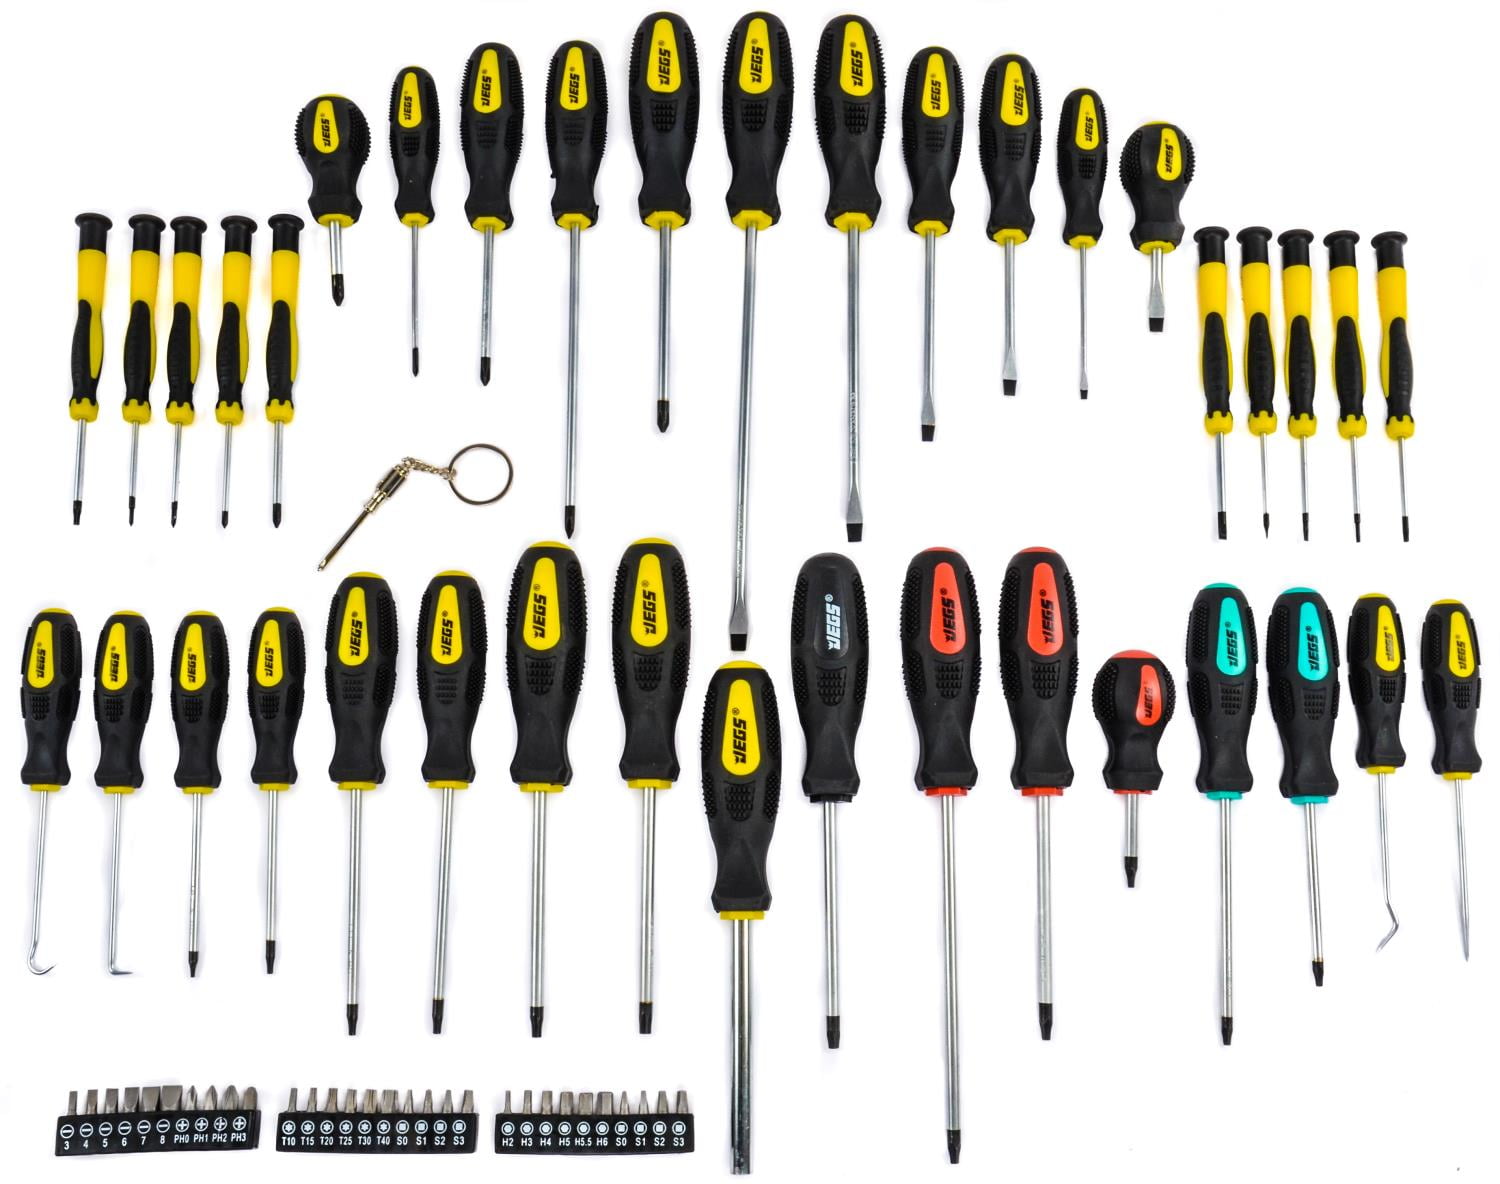 JEGS 69-pc Magnetic Screwdriver set Awls Torx Square Phillips Slotted Bits 80755